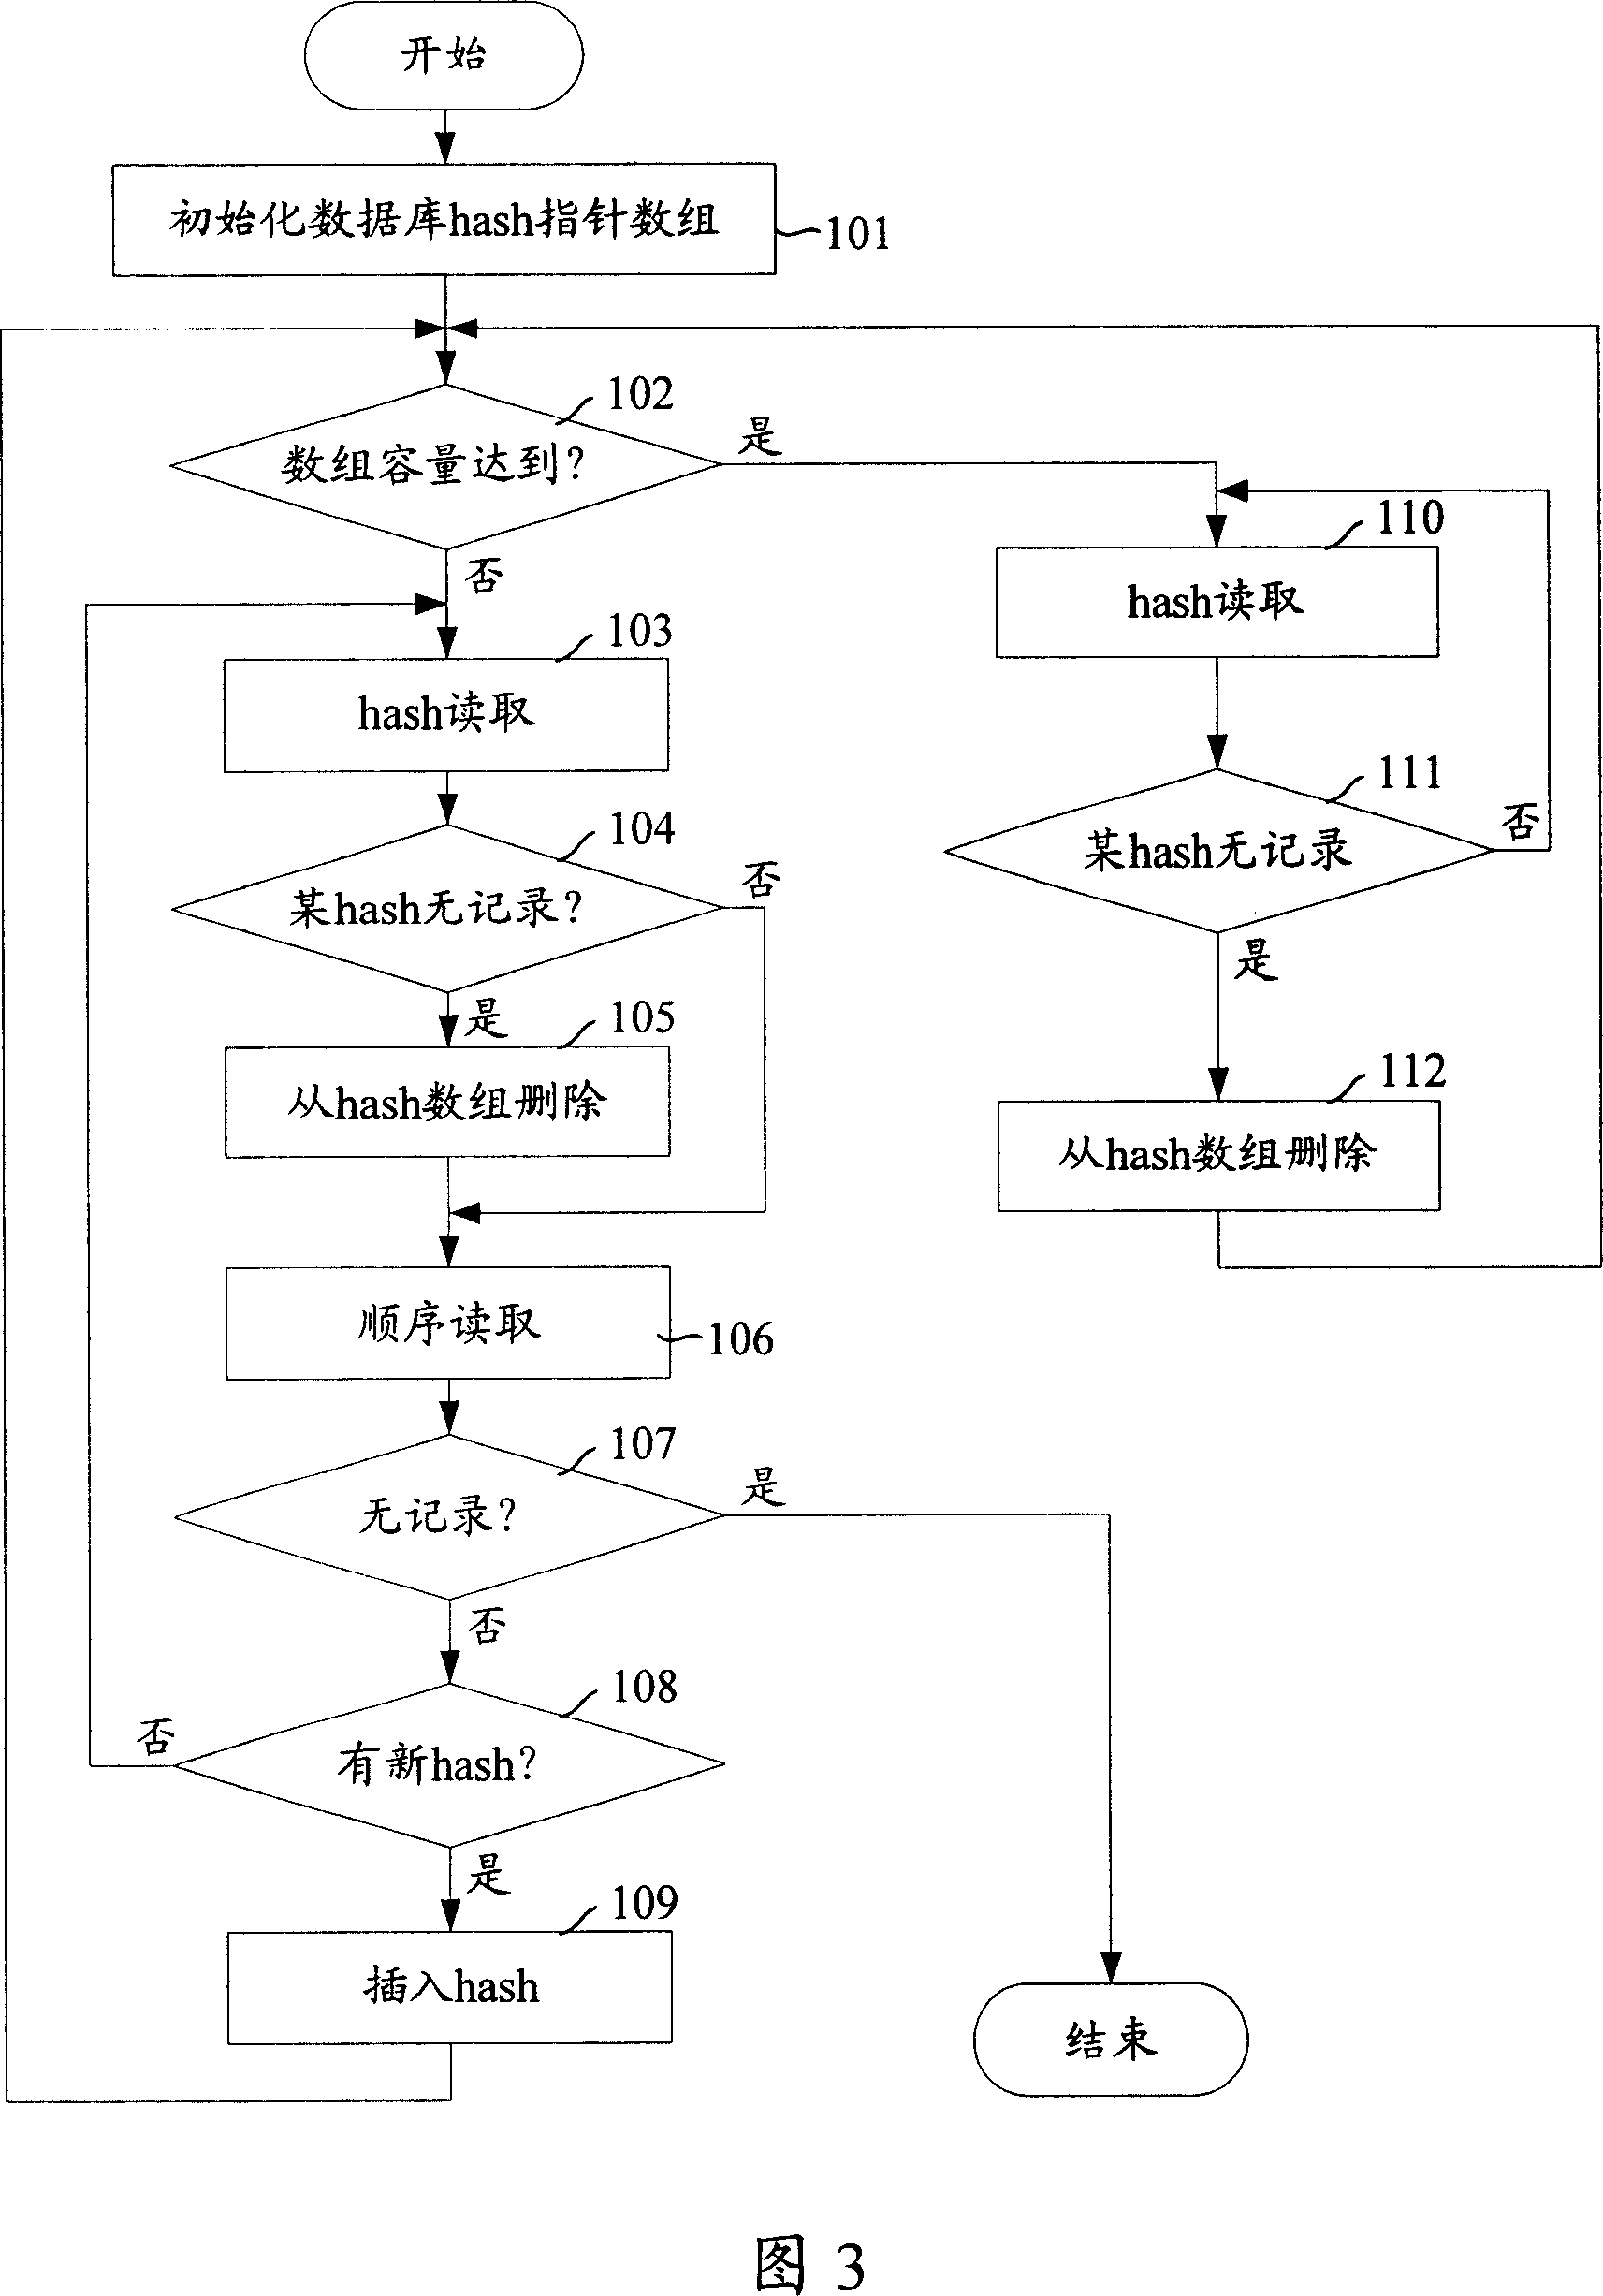 Method and system for reading information at network resource site, and searching engine